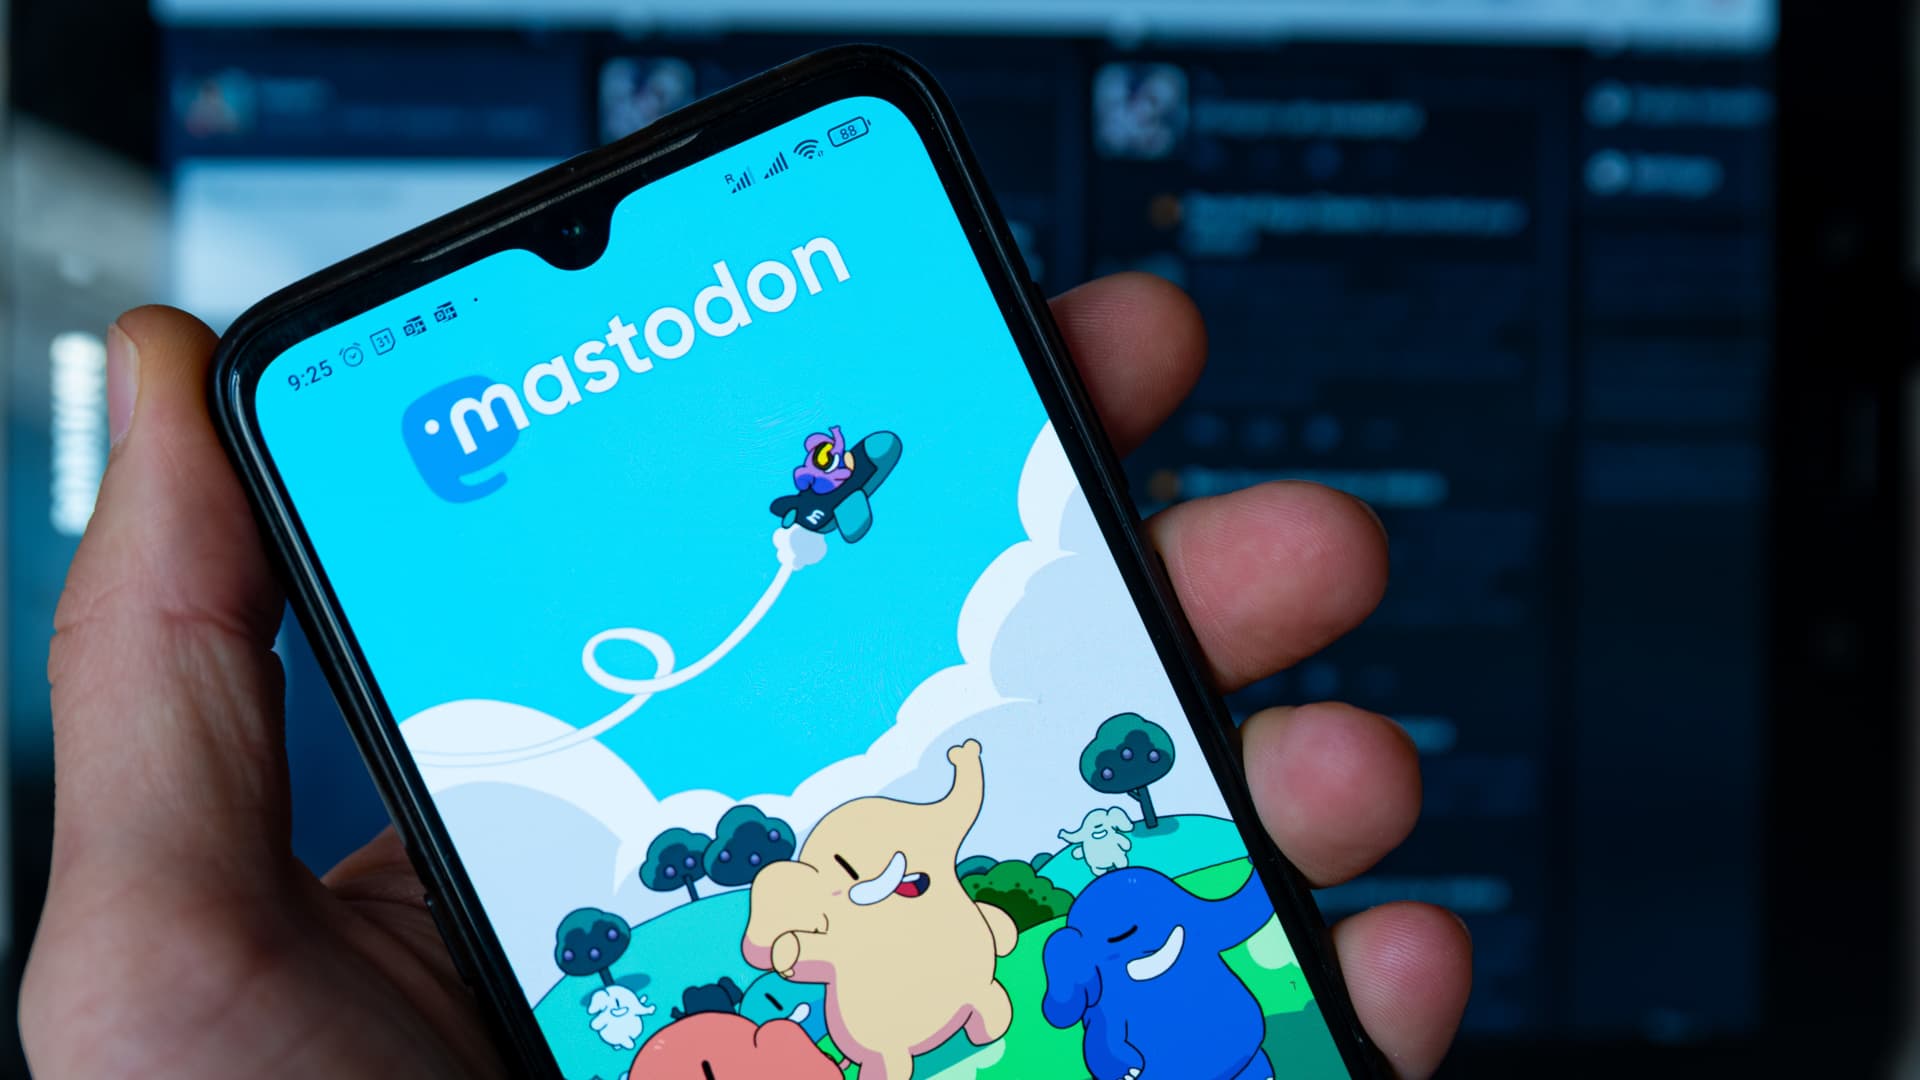 Musk's Twitter takeover sent thousands flocking to Mastodon. Heres what I discovered using the app